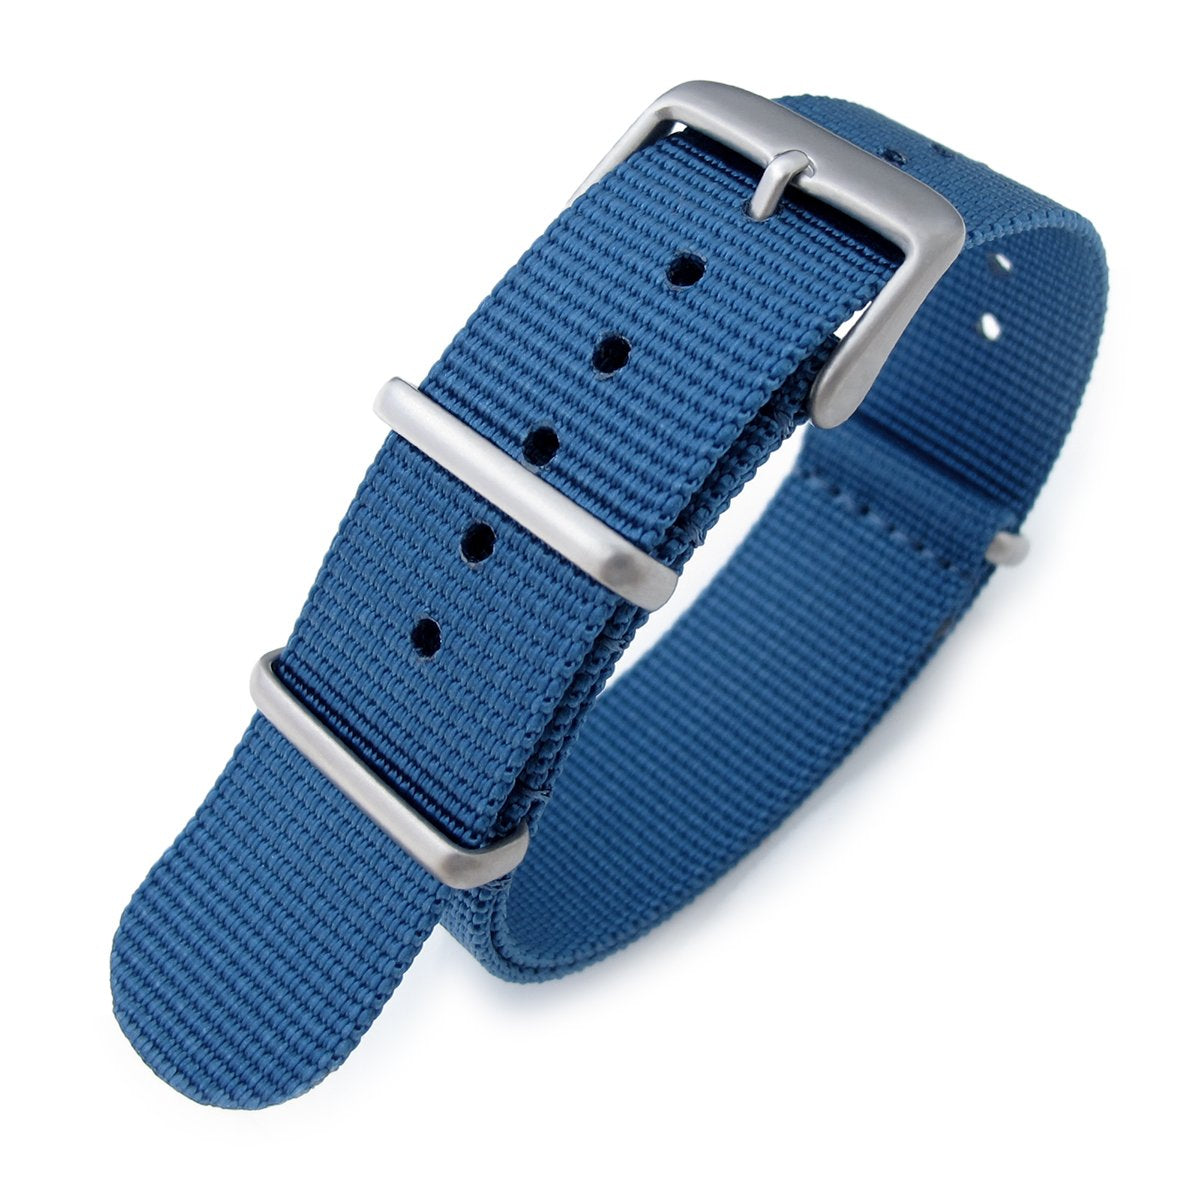 NATO 20mm G10 Military Watch Band Nylon Strap Blue Sandblasted 260mm Strapcode Watch Bands